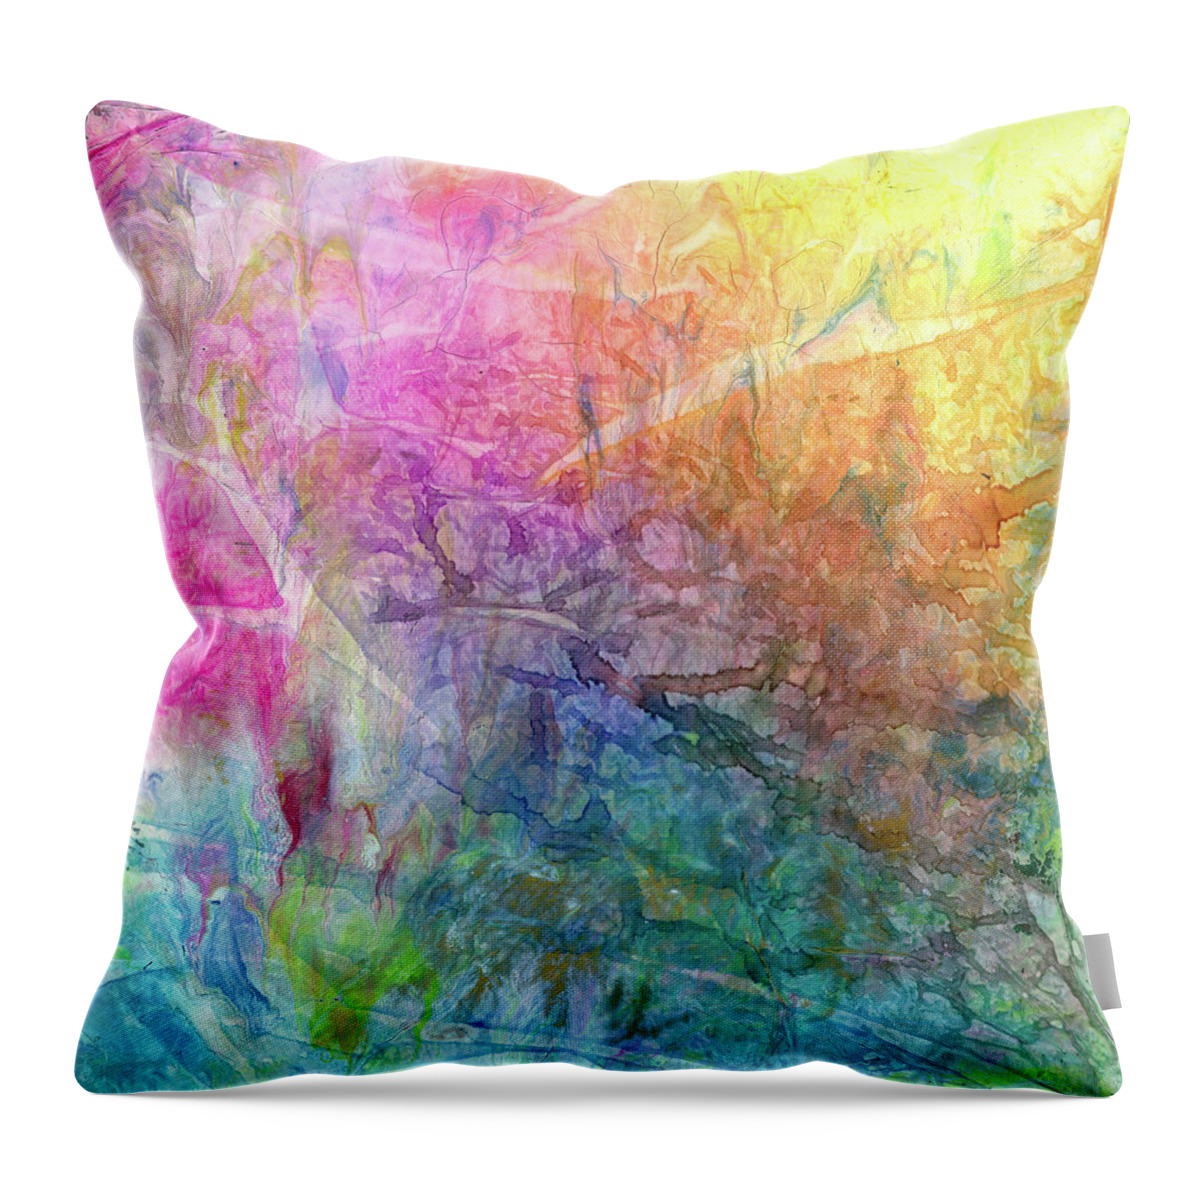 Color Throw Pillow featuring the mixed media Where I Go by Katy Bishop